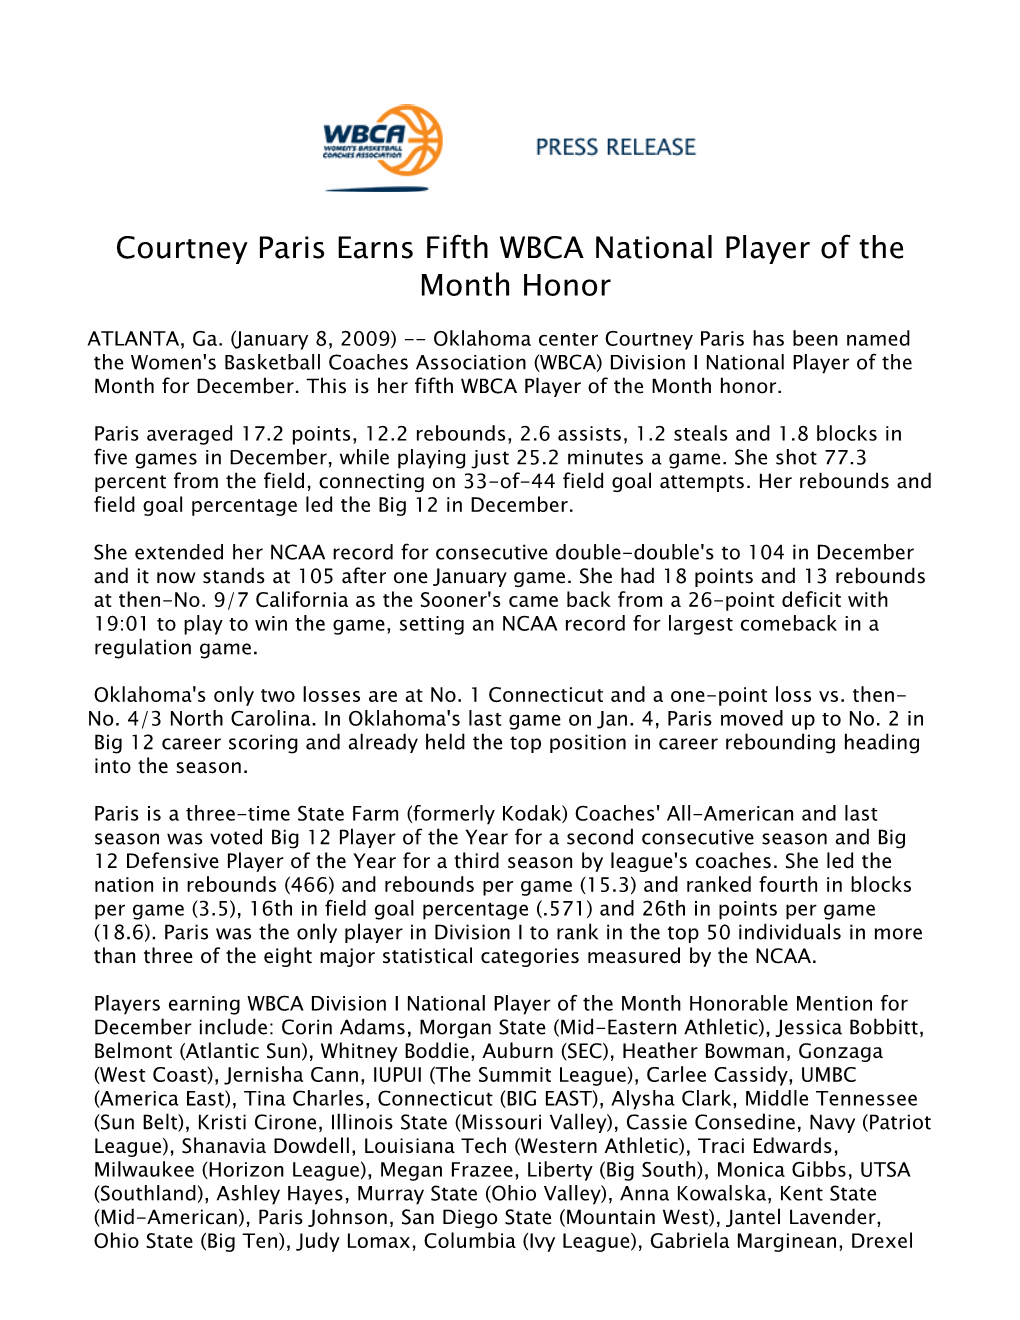 Courtney Paris Earns Fifth WBCA National Player of the Month Honor